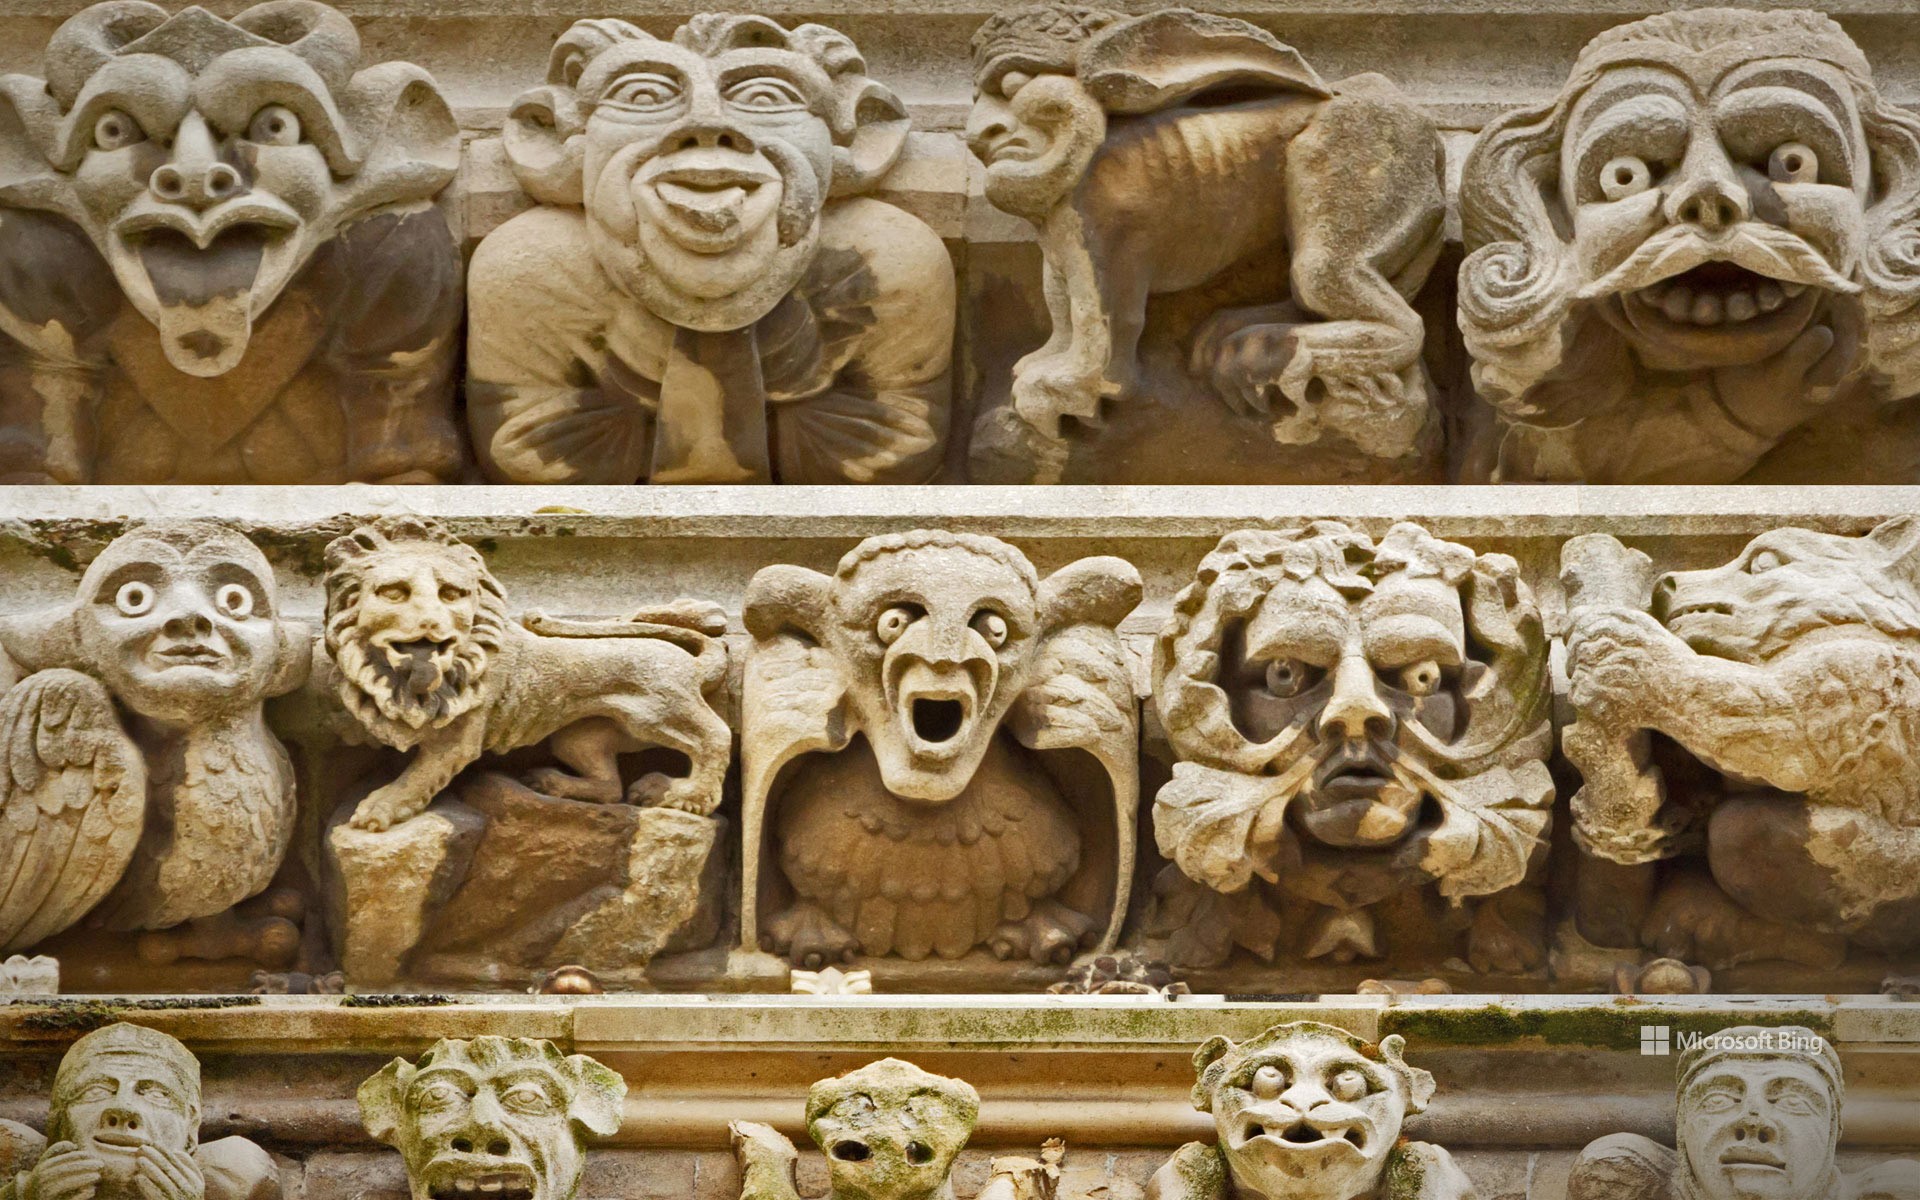 Grotesques at York Minster, York